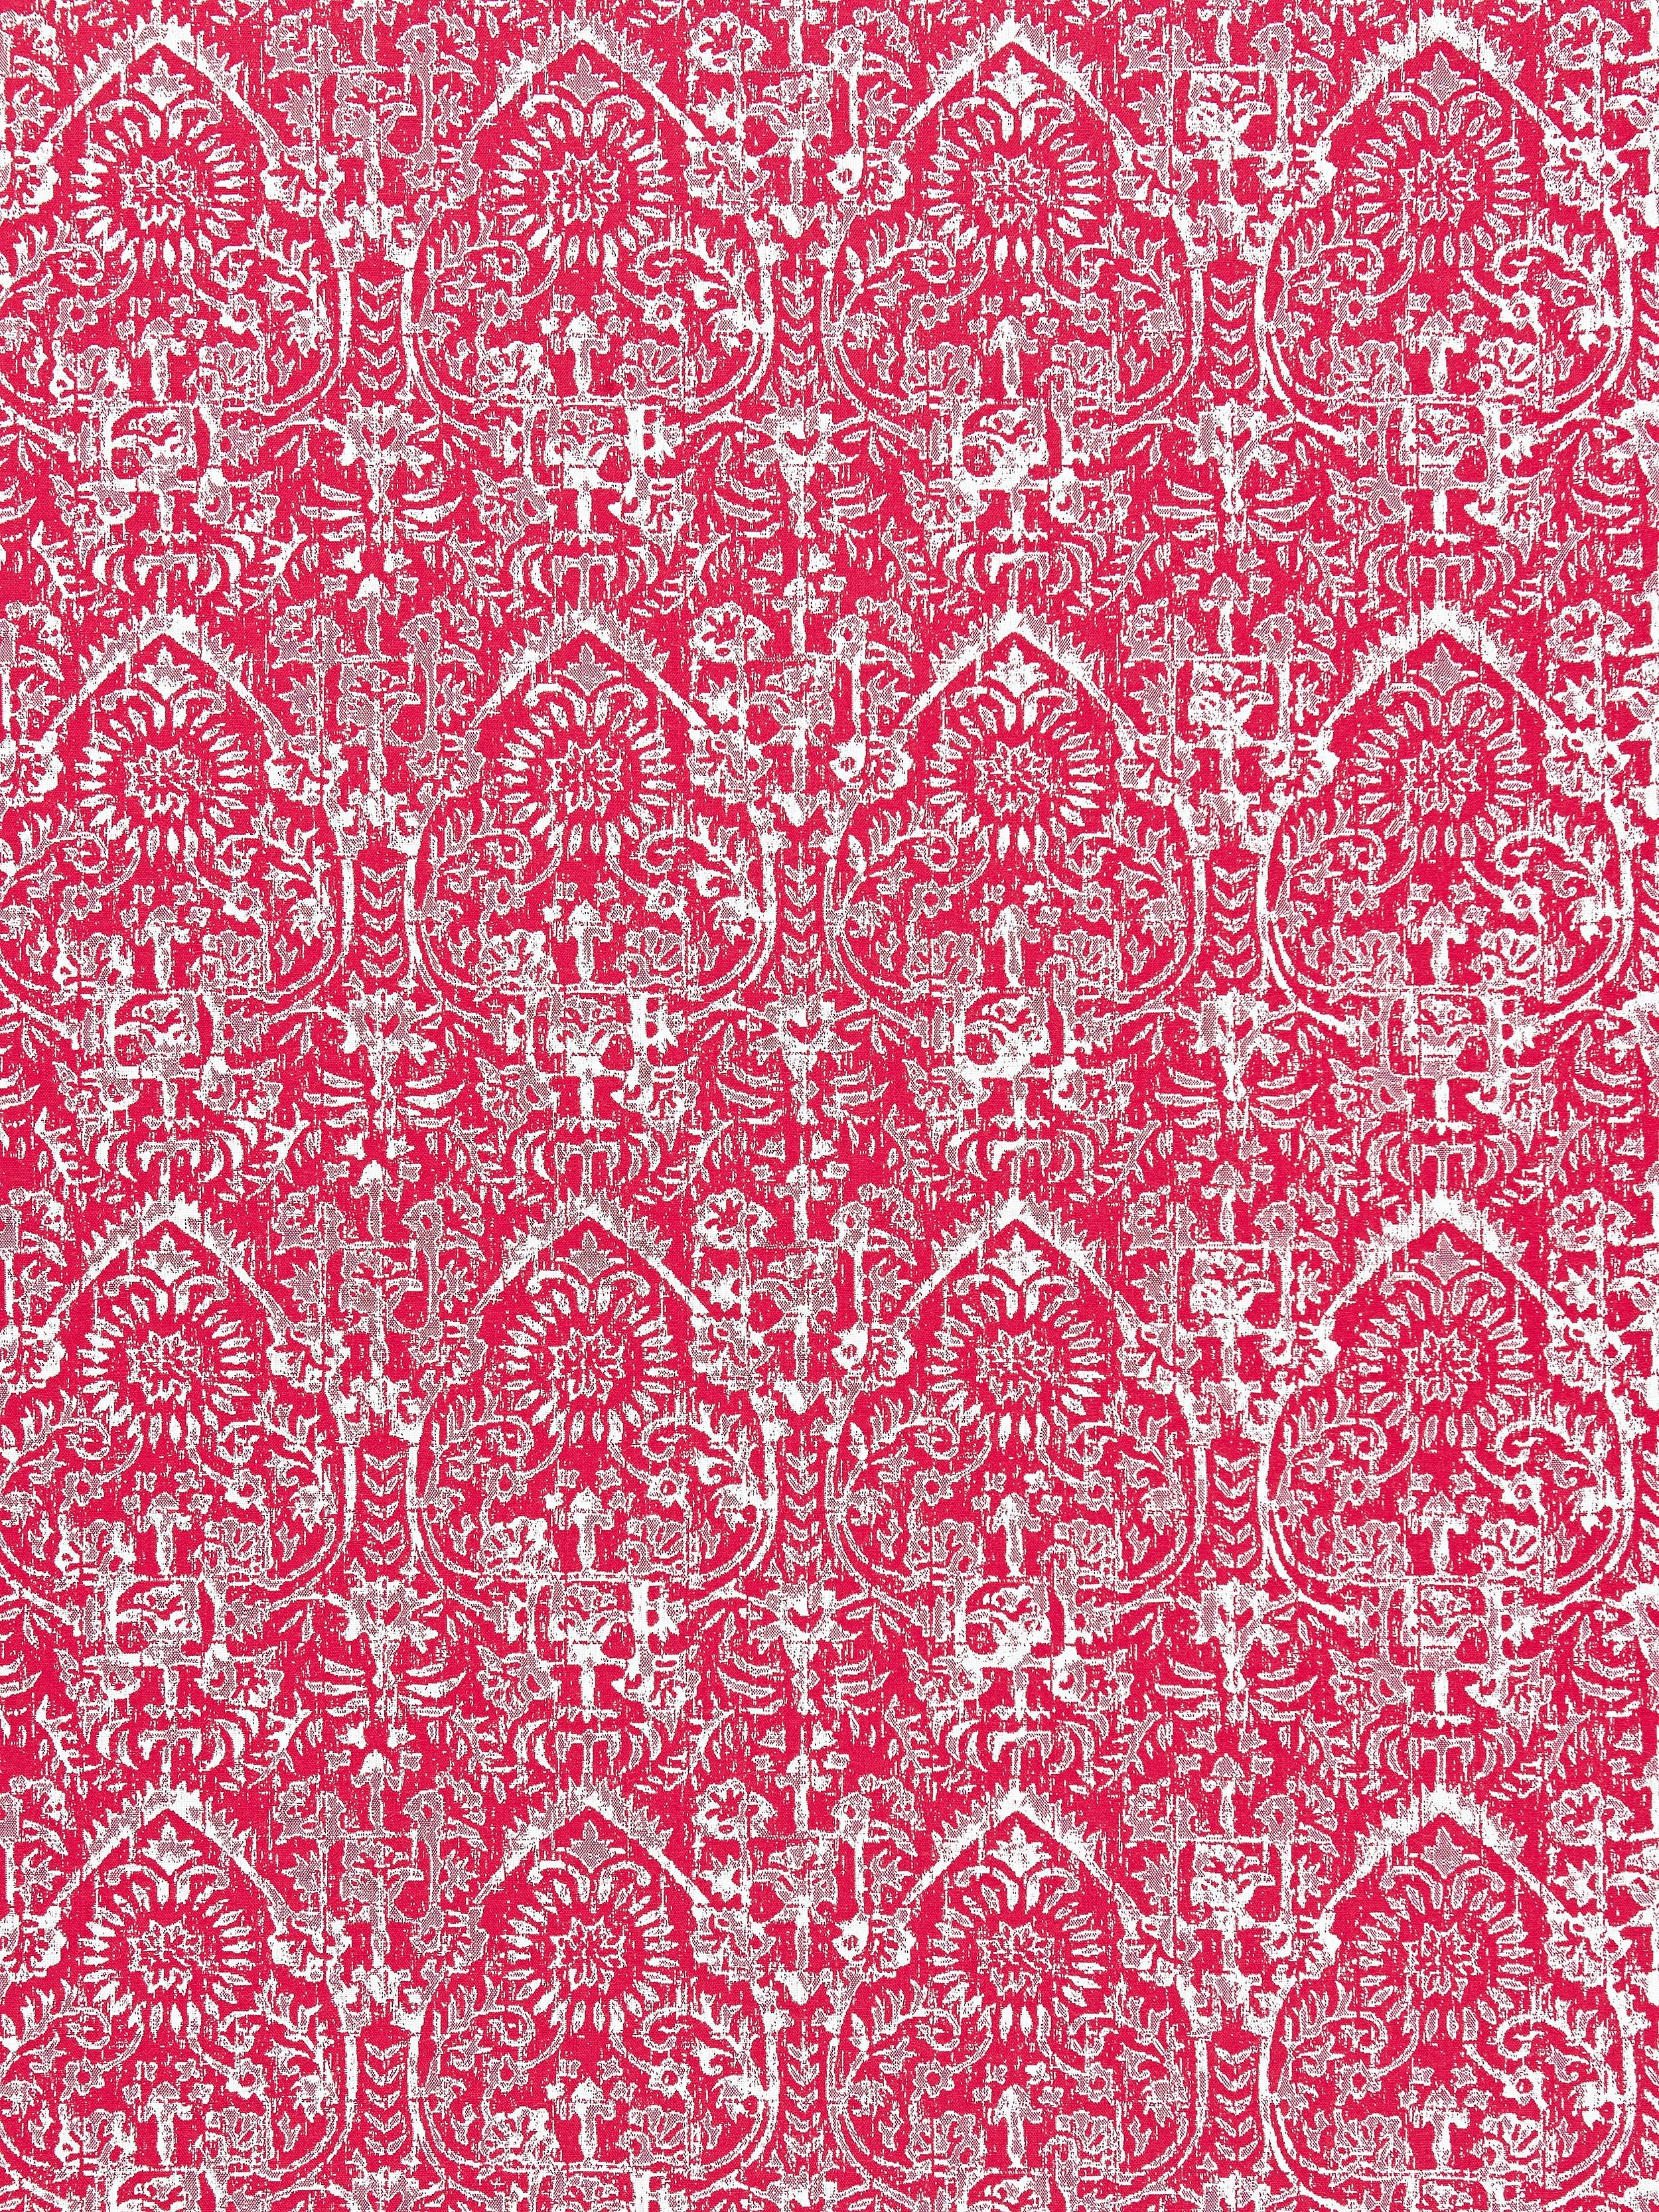 Sarong fabric in hibiscus color - pattern number SC 000327058 - by Scalamandre in the Scalamandre Fabrics Book 1 collection